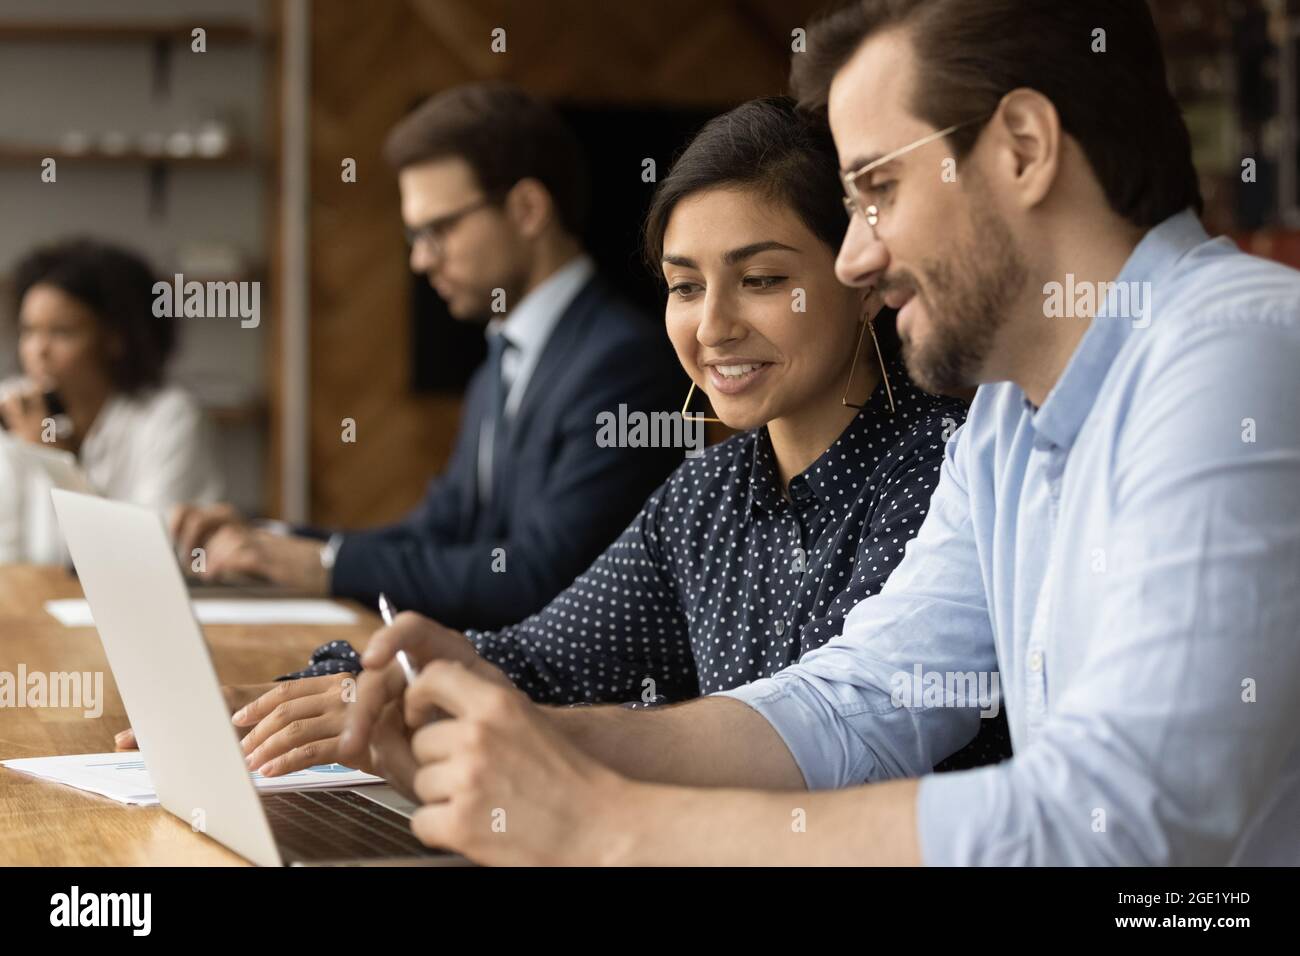 Indian businesswoman caucasian businessman using laptop discussing new collaborative project Stock Photo